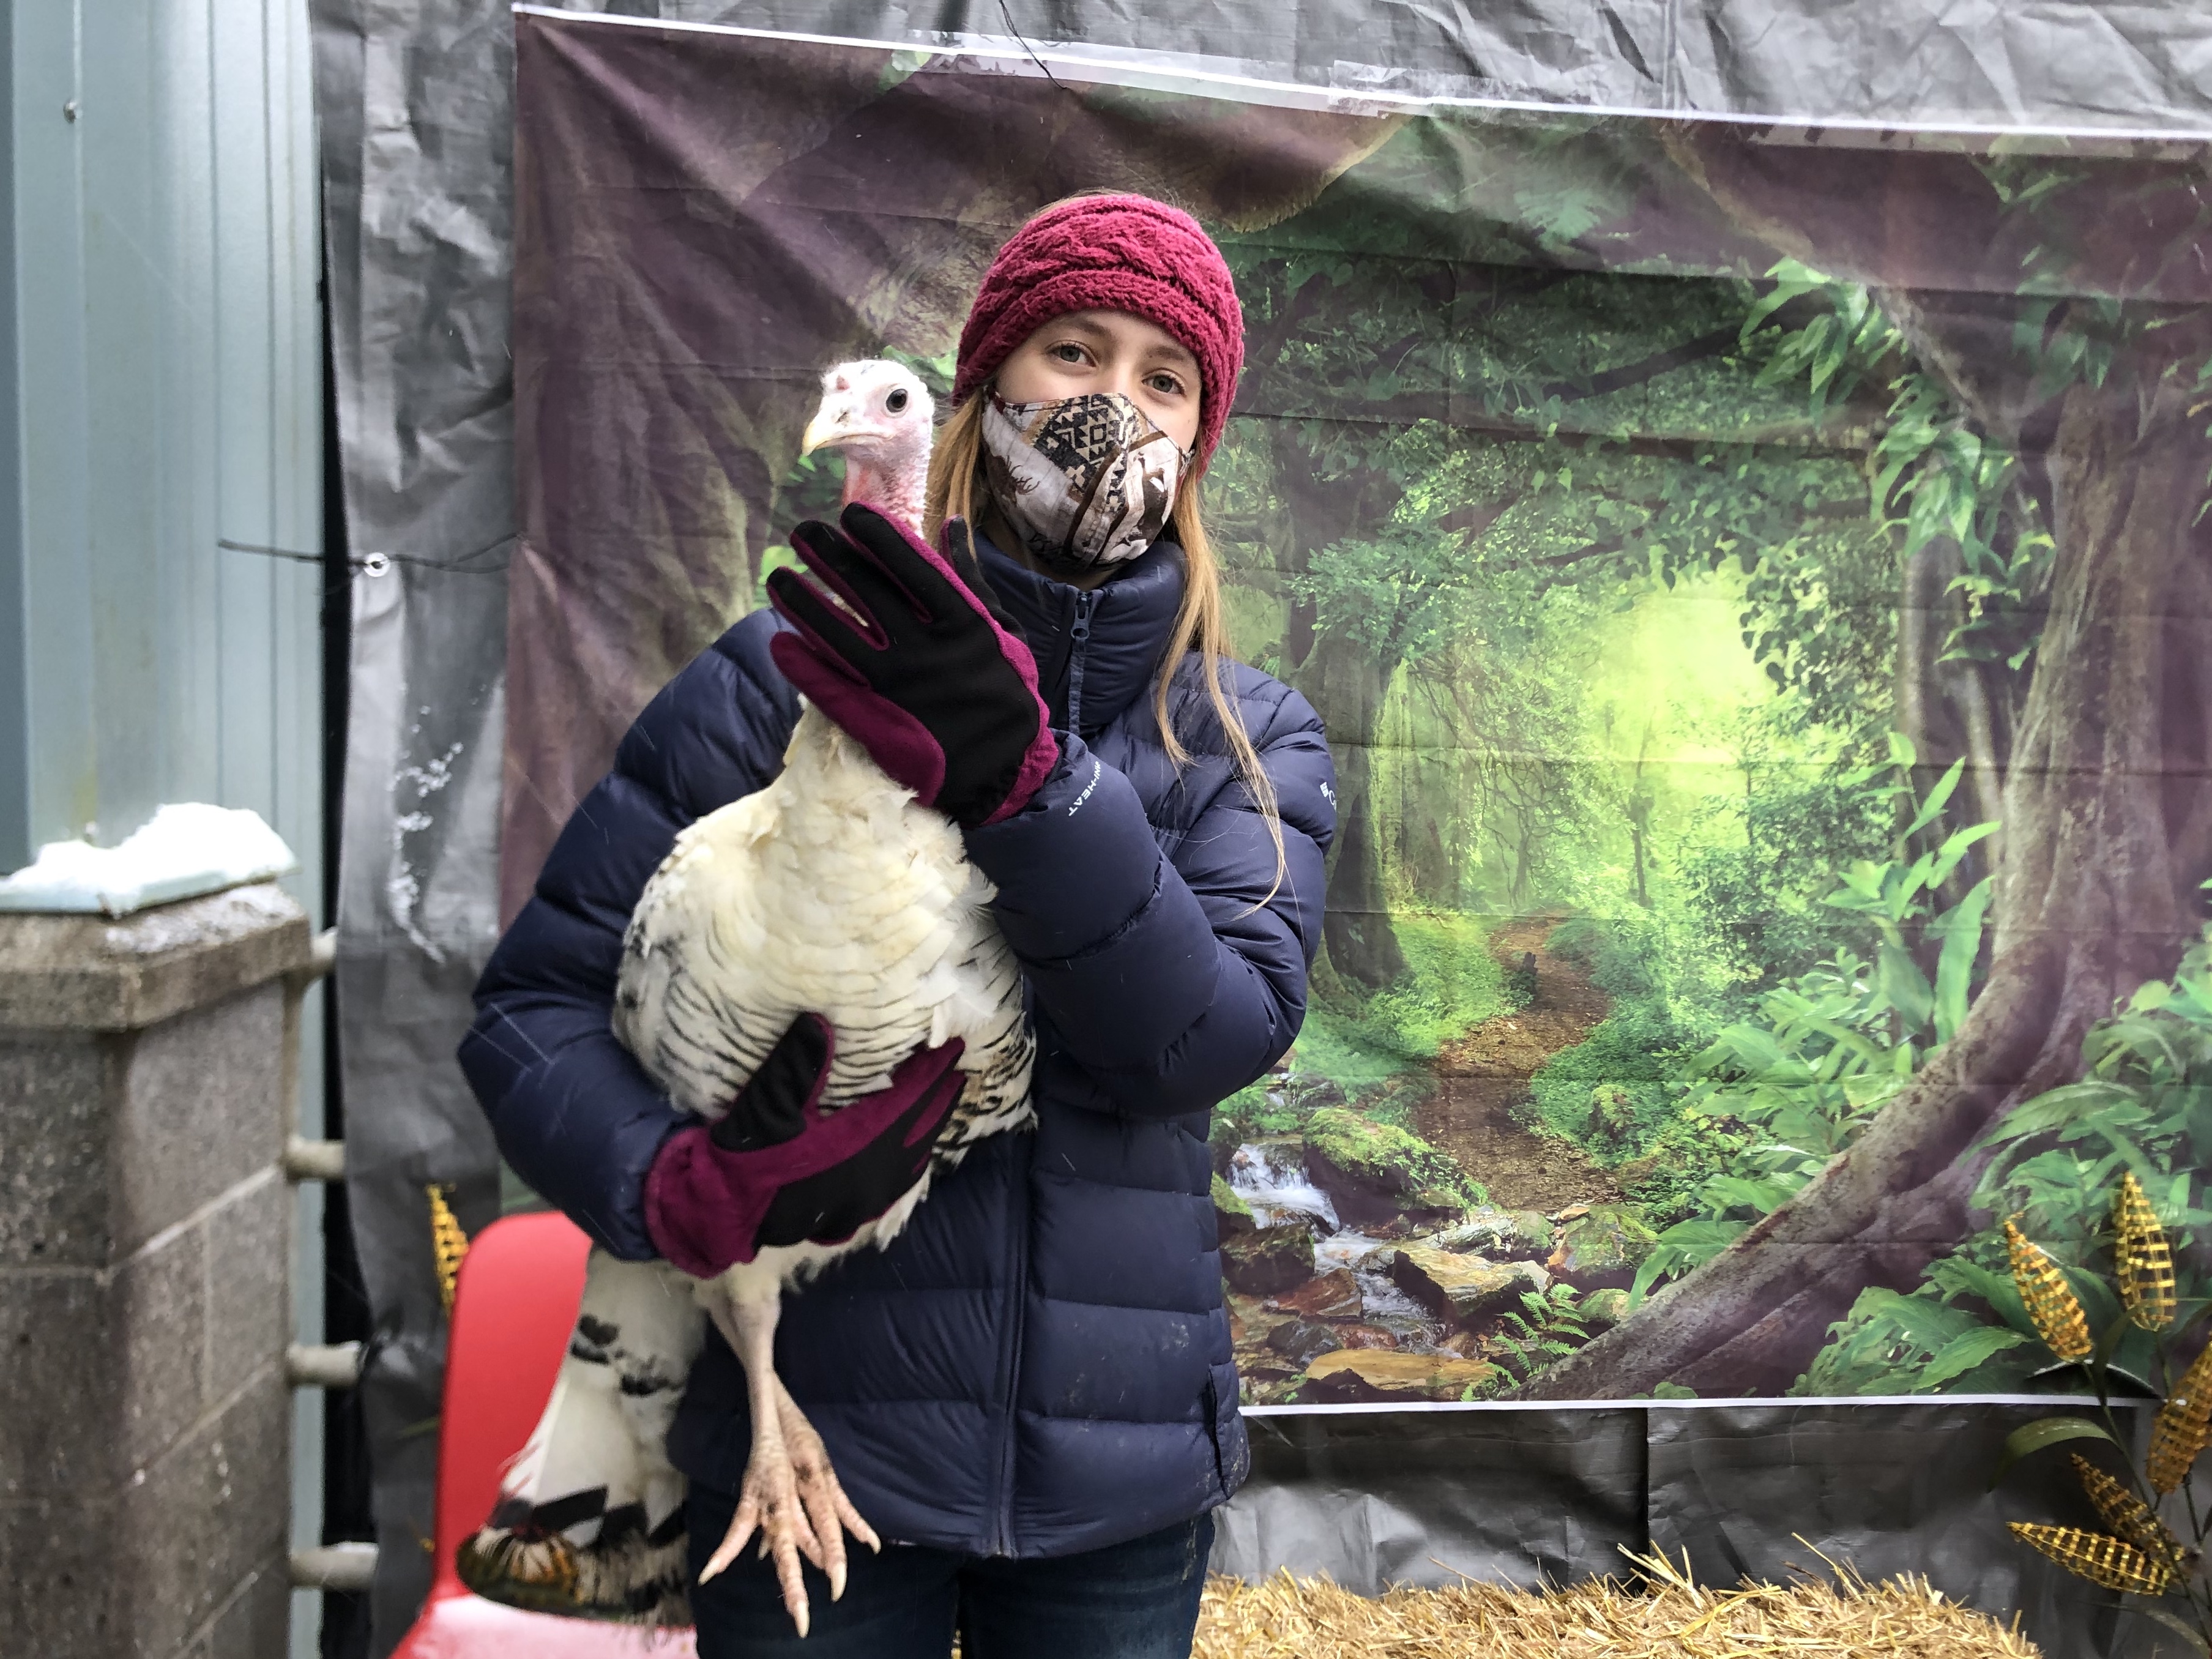 Turkey shoot' raises funds for raising farm animals and awareness about  where our food comes from